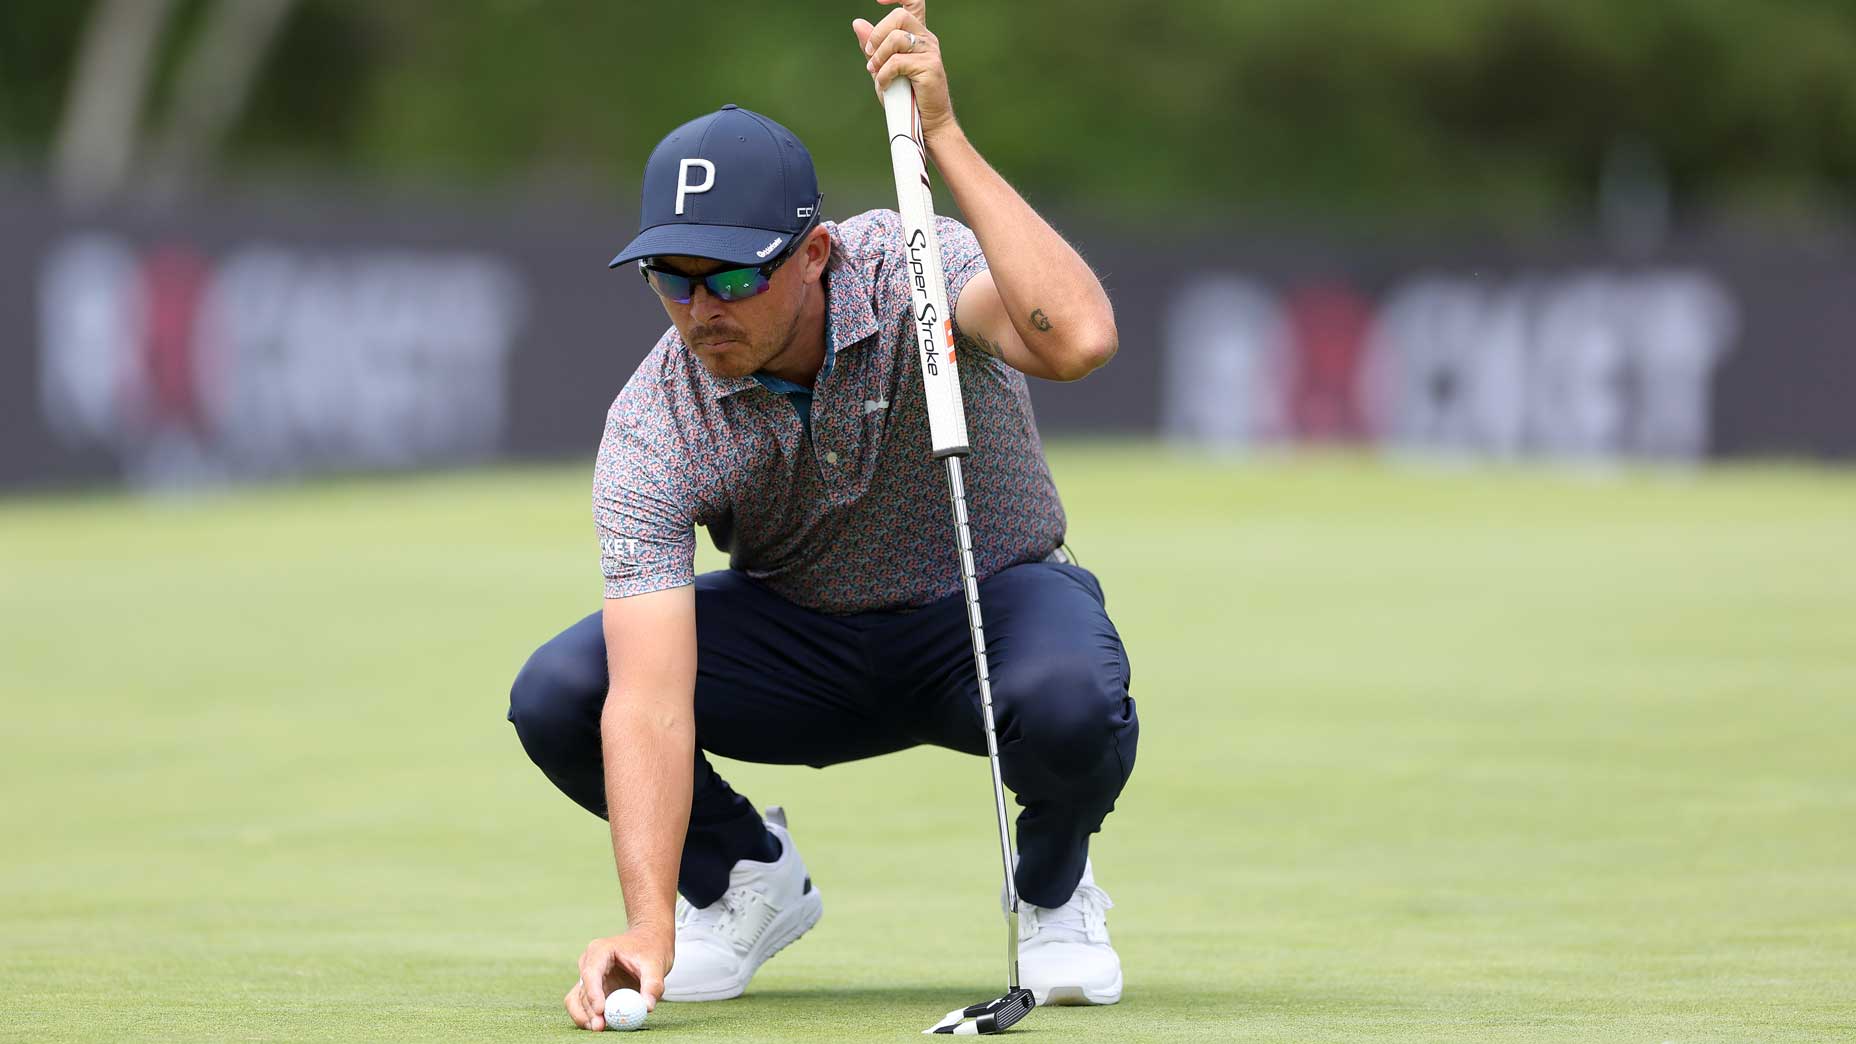 Rickie Fowler has been battling the putting yips, he said Thursday in Detroit.